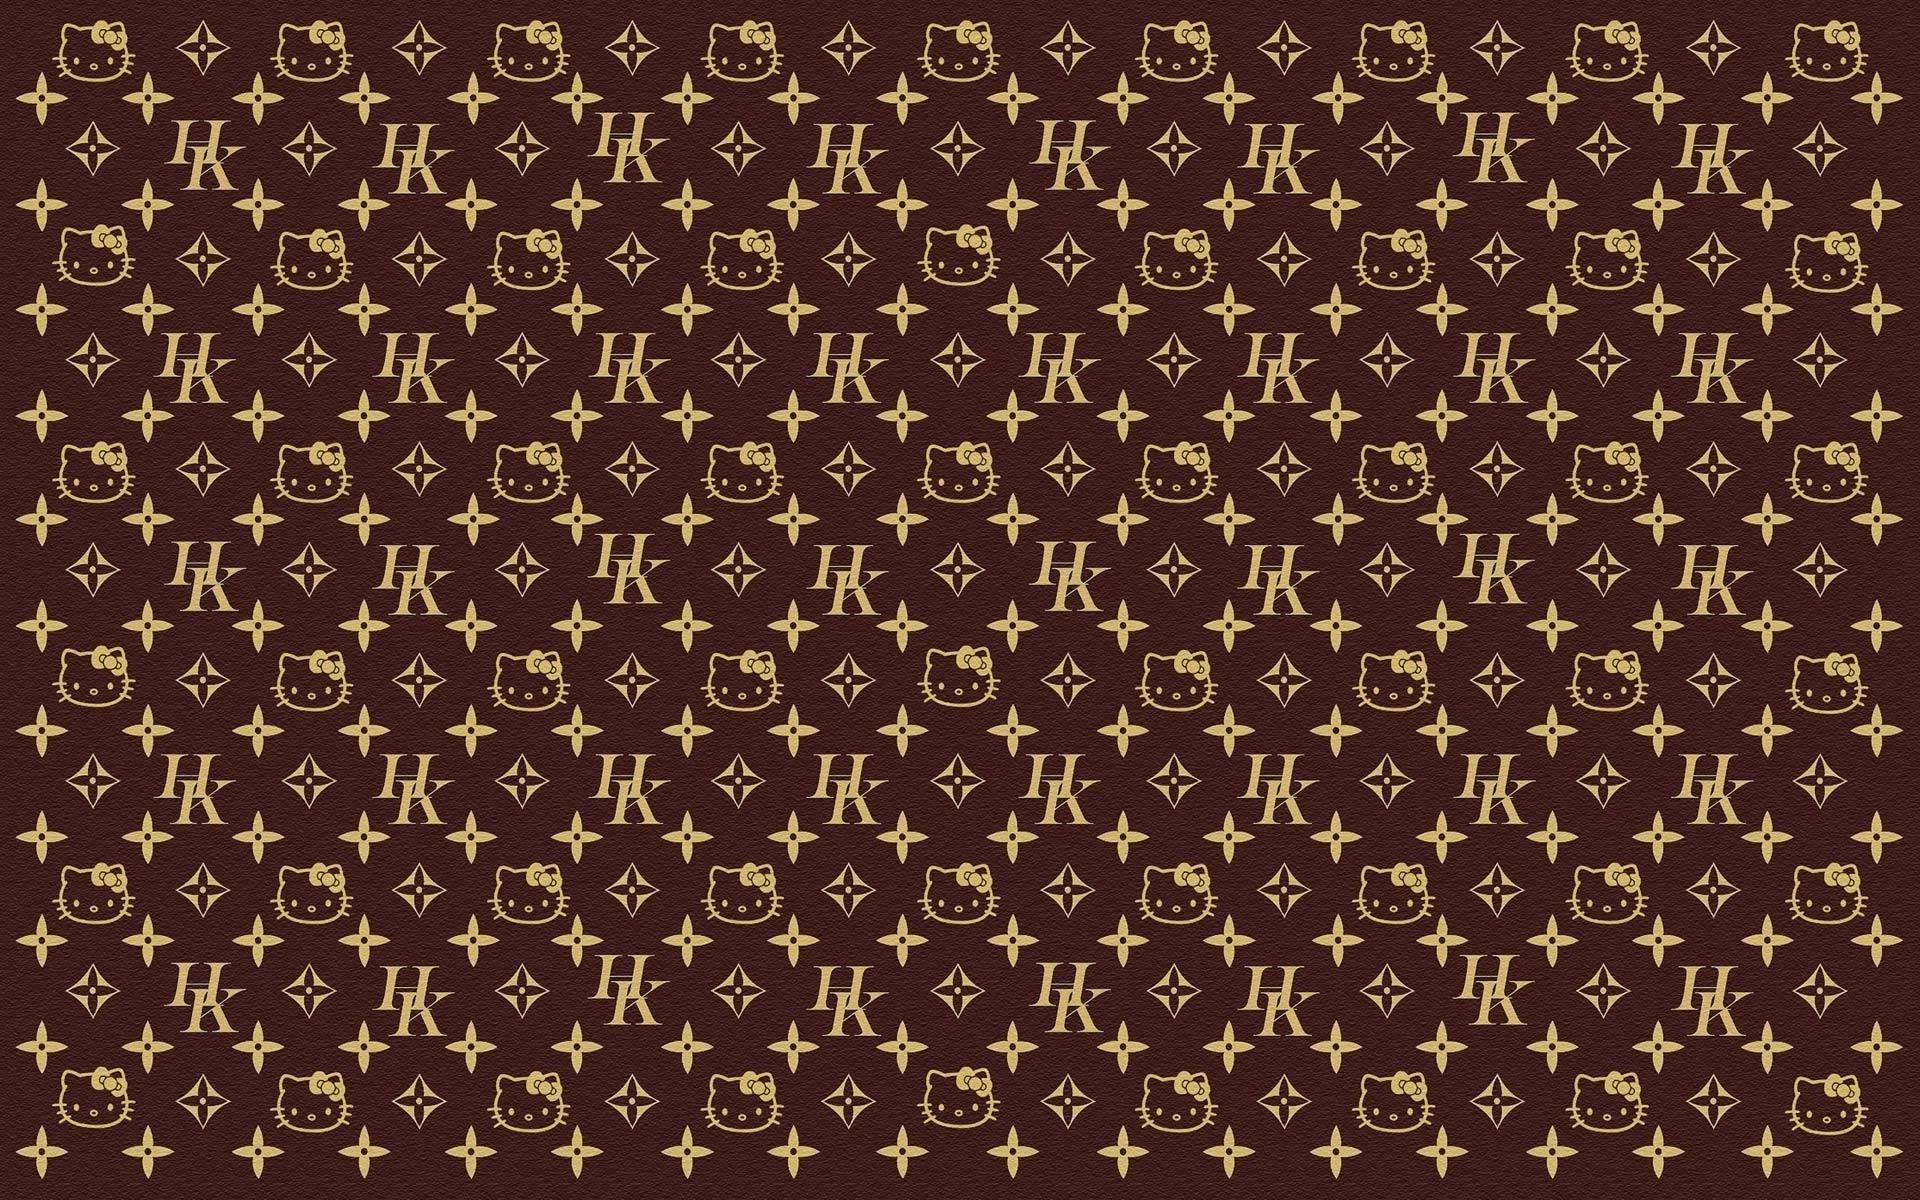 Girly Louis Vuitton Wallpapers - Wallpaper Cave